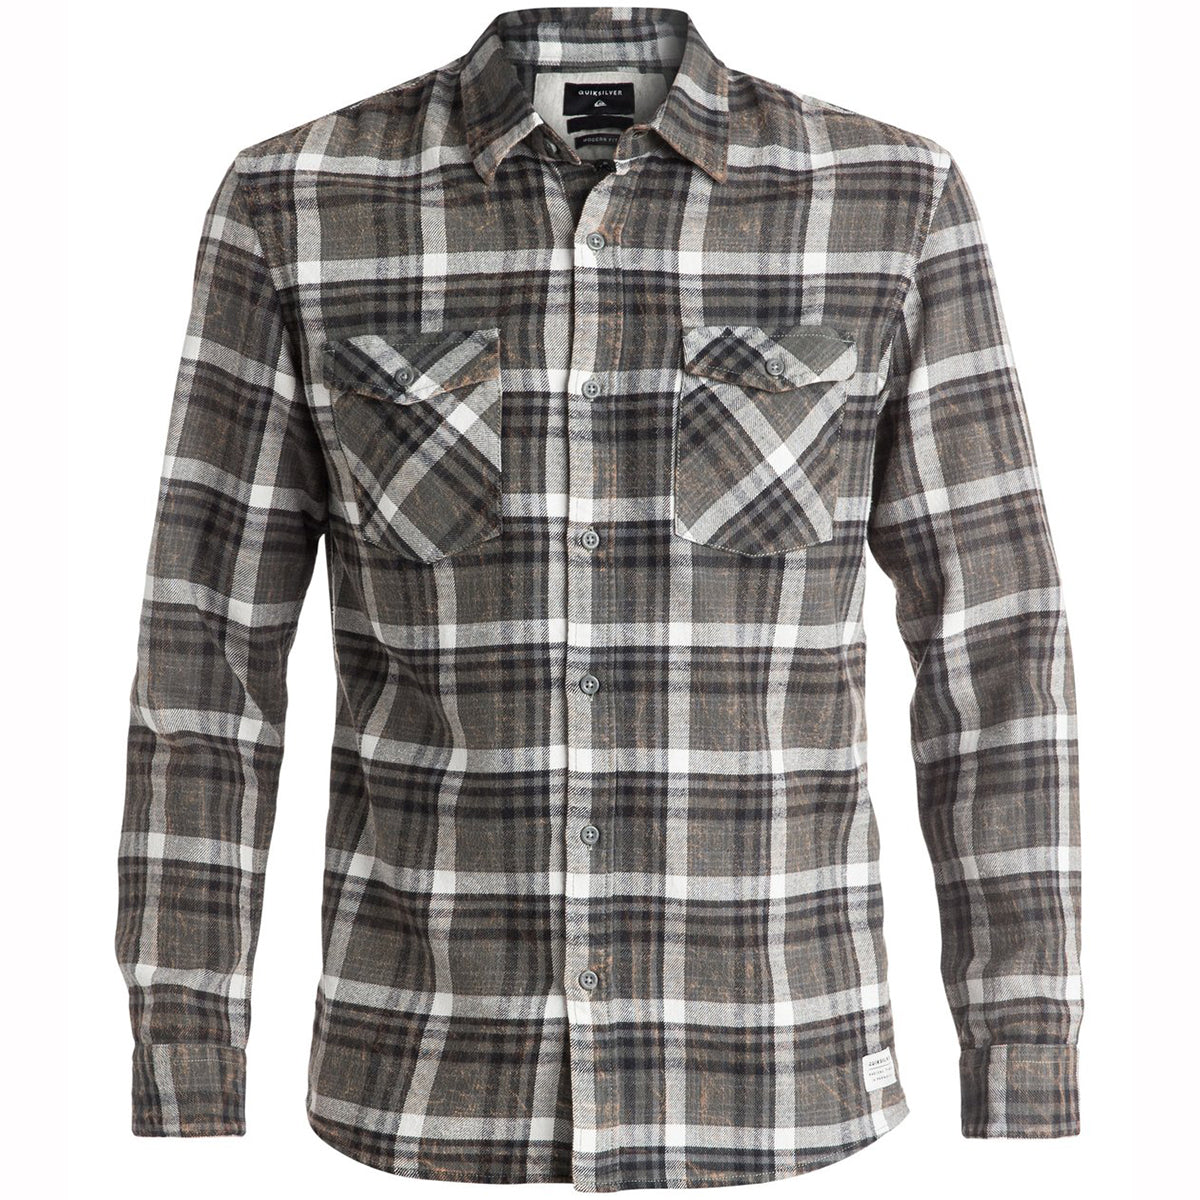 Quiksilver Lost Wave Flannel Men's Button Up Long-Sleeve Shirts - Lost Wave Quiet Shade